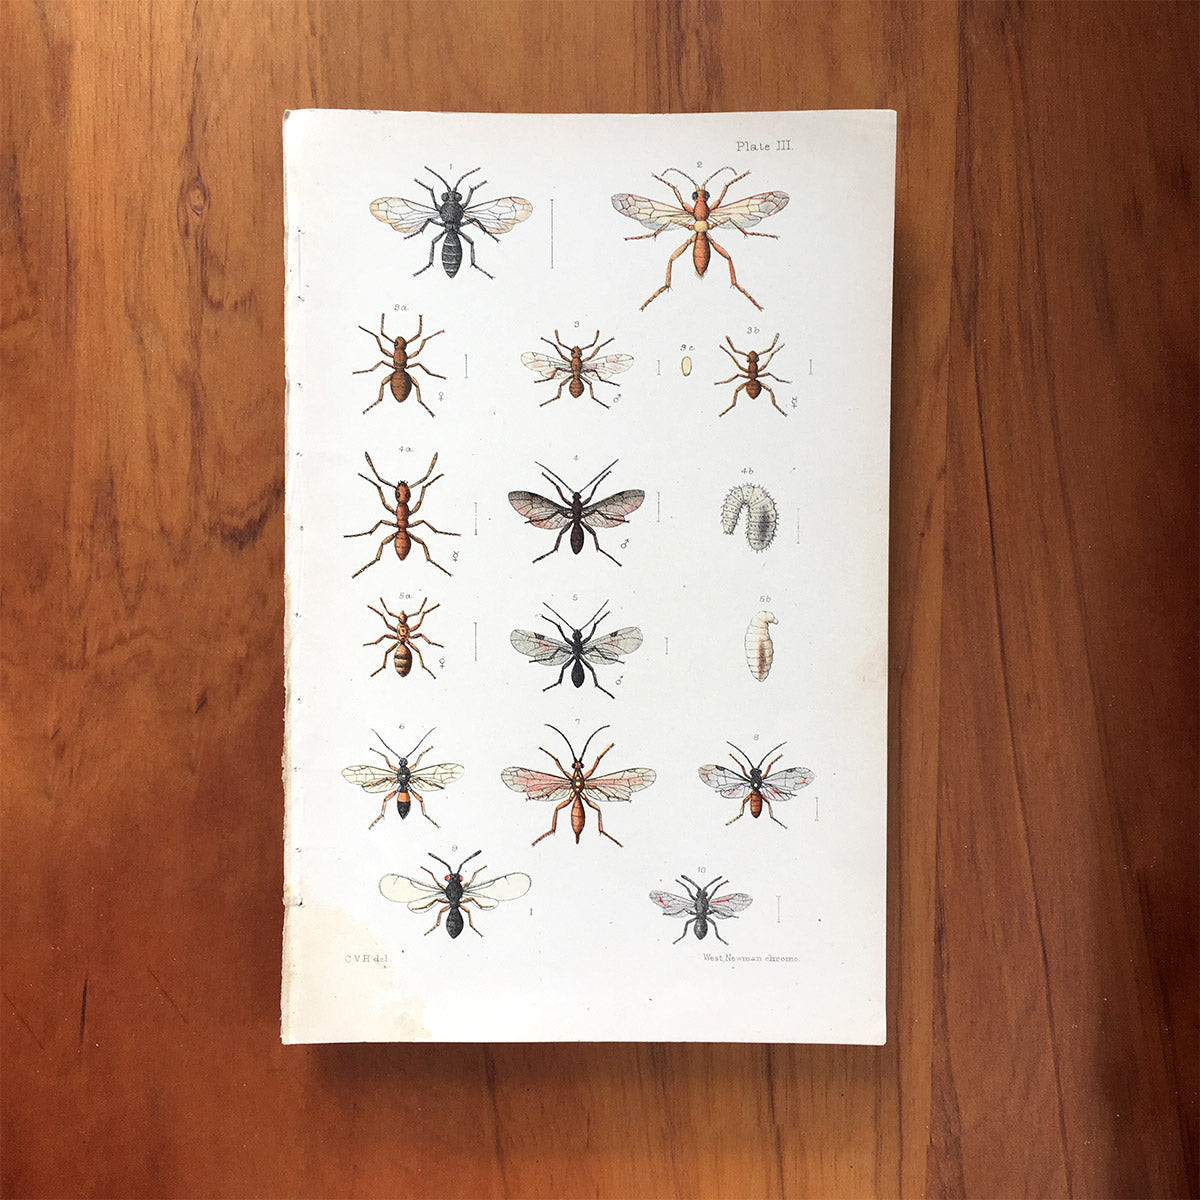 New Zealand insects. Plate III. Hymenoptera